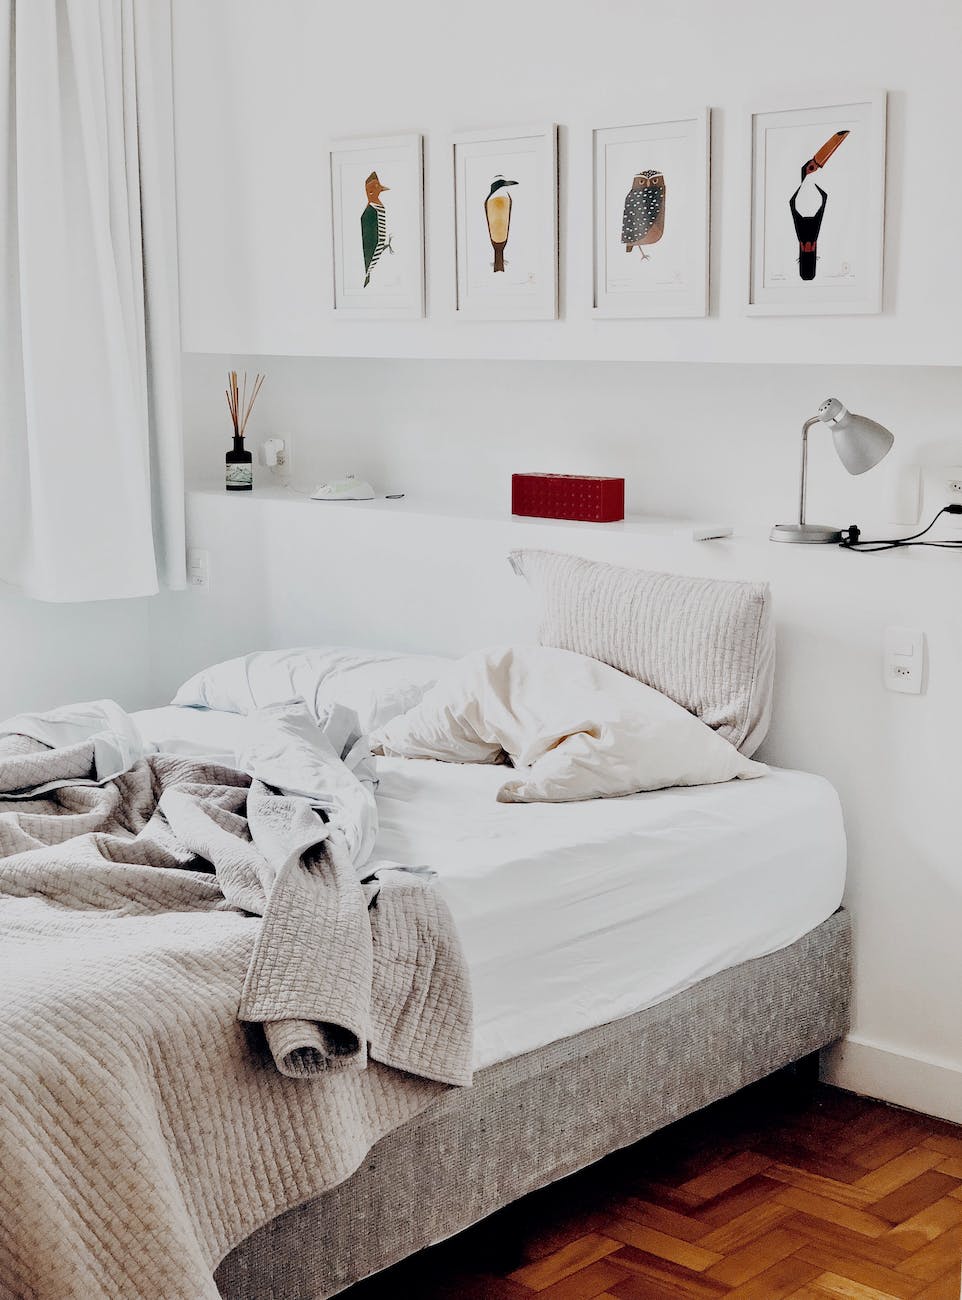 How to host an overnight stay and make your guests feel at home